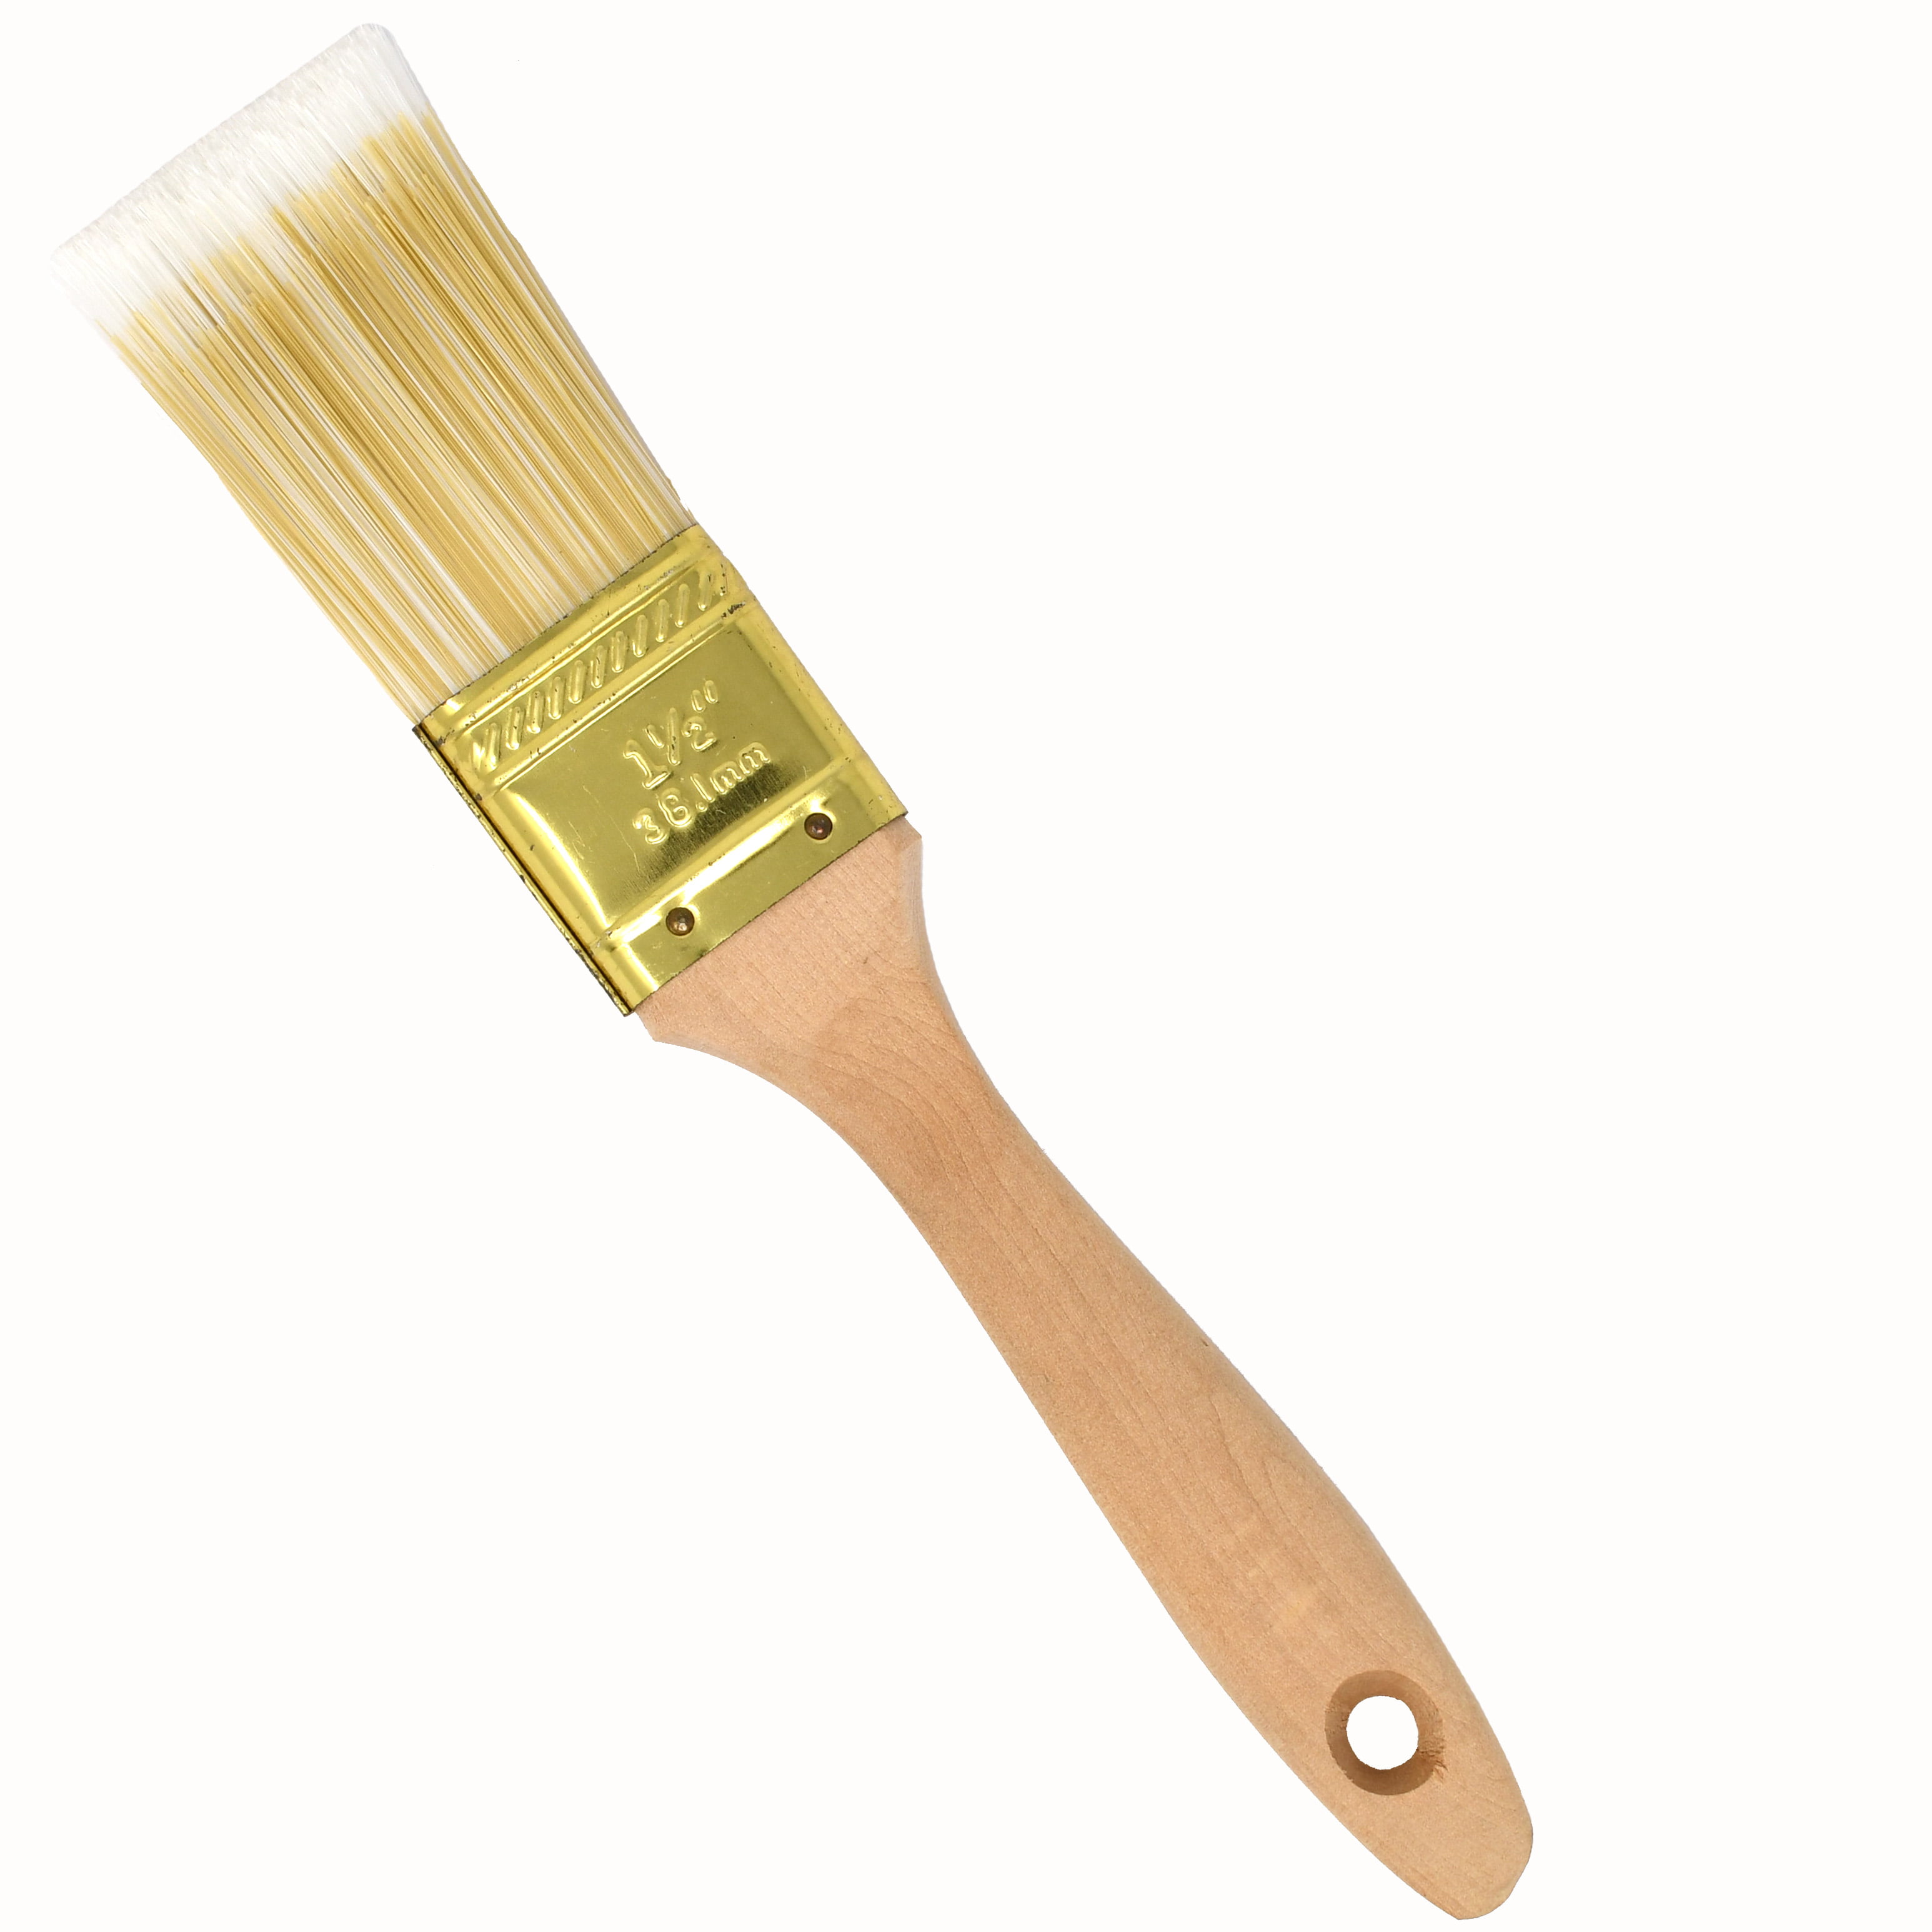 Picture of Aleko PB1-1.2P-UNB 1.5 in. Flat-Cut Polyester Paint Brush with Wooden Handle for Home Exterior or Interior